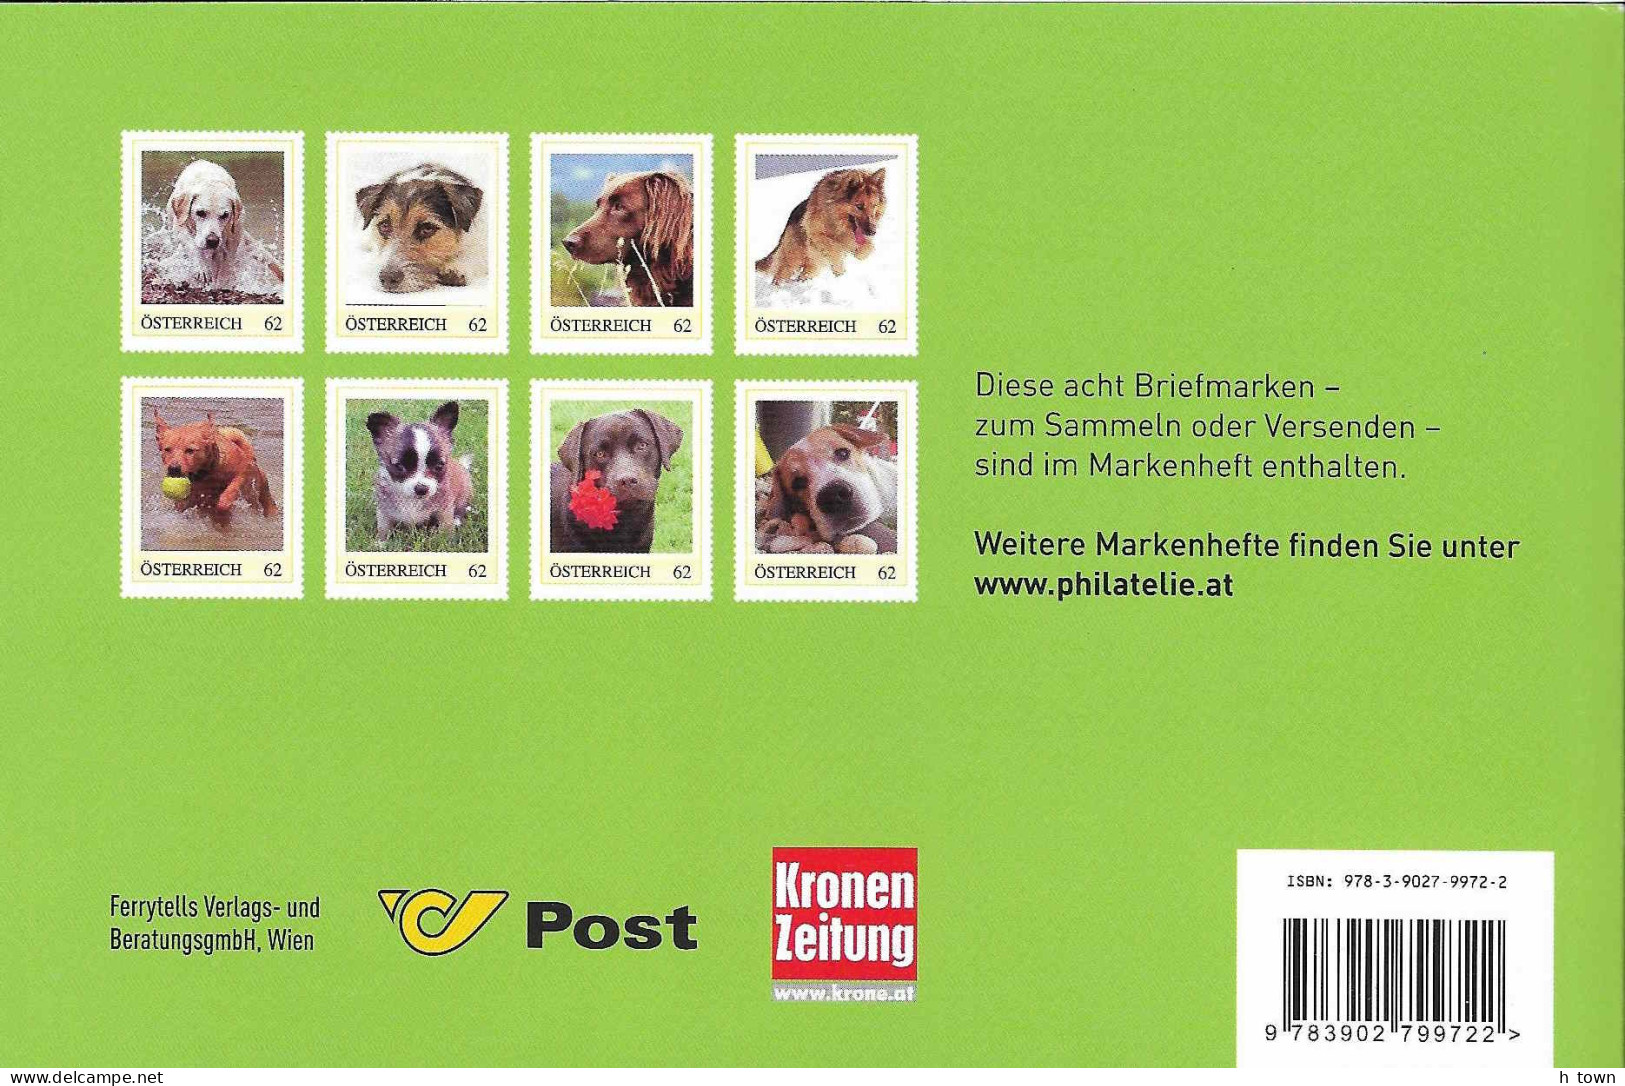 335  Chiens: Carnet De Timbres Pers. D'Autriche - Dogs: Booklet Of "Personalized" Stamps From Austria. Tennis Ball - Tennis